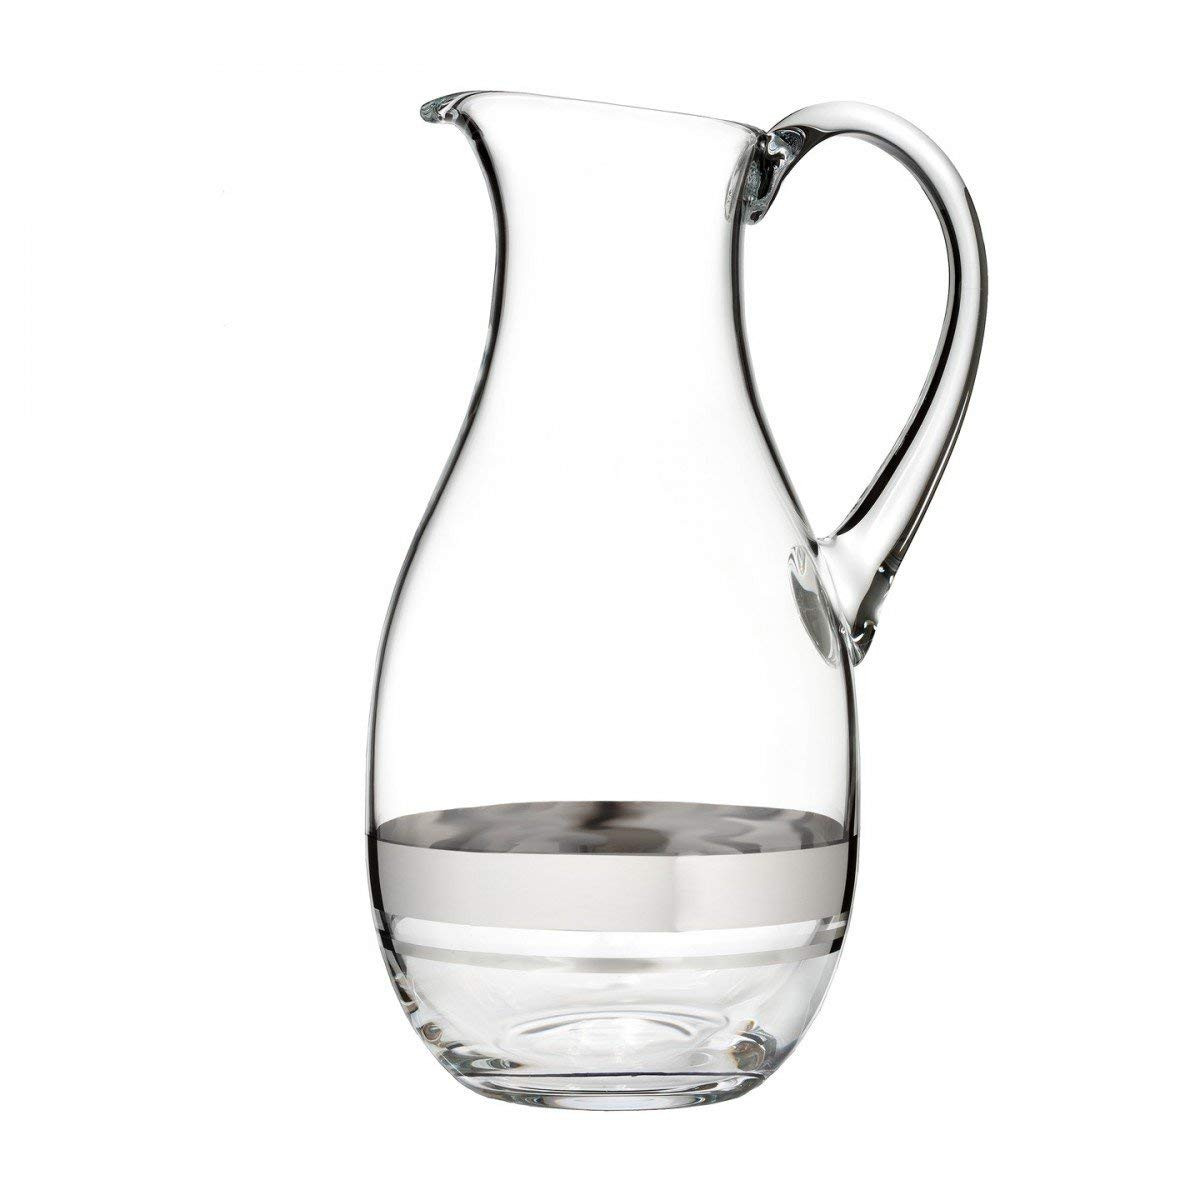 16 Unique Waterford Crystal Vase Price 2024 free download waterford crystal vase price of amazon com elegance pitcher carafes pitchers for 614s1vvffpl sl1200